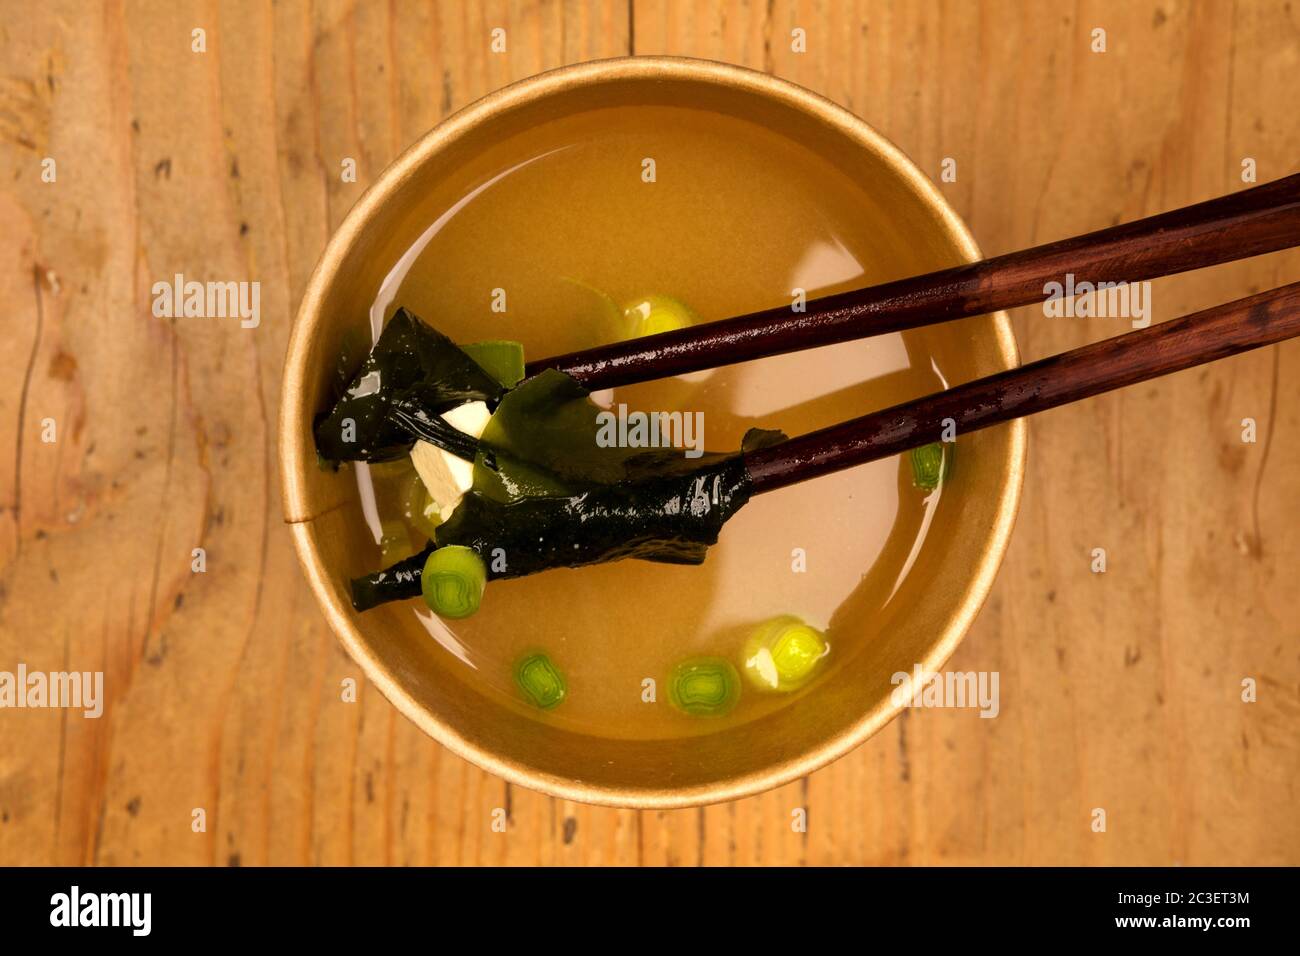 Traditionelle Miso-Suppe im Take-away-Becher Stockfotografie - Alamy